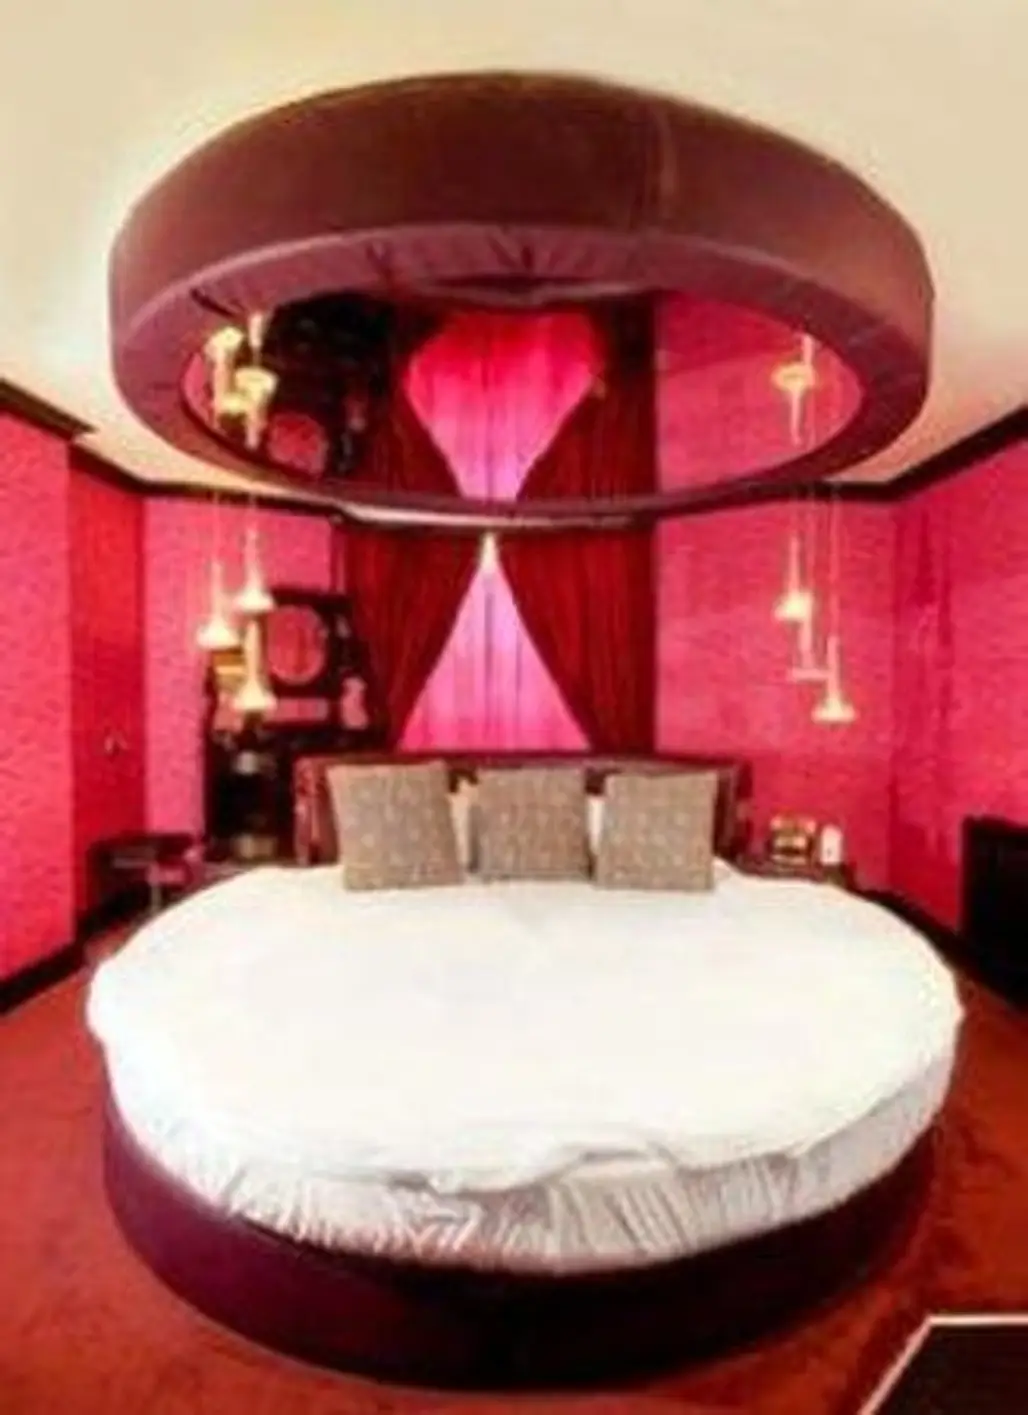 Enjoy an 8 Foot round Bed Complete with Overhead Mirror and Dance Pole in the Kraken's Lair at the Pelirocco Hotel, Brighton, UK